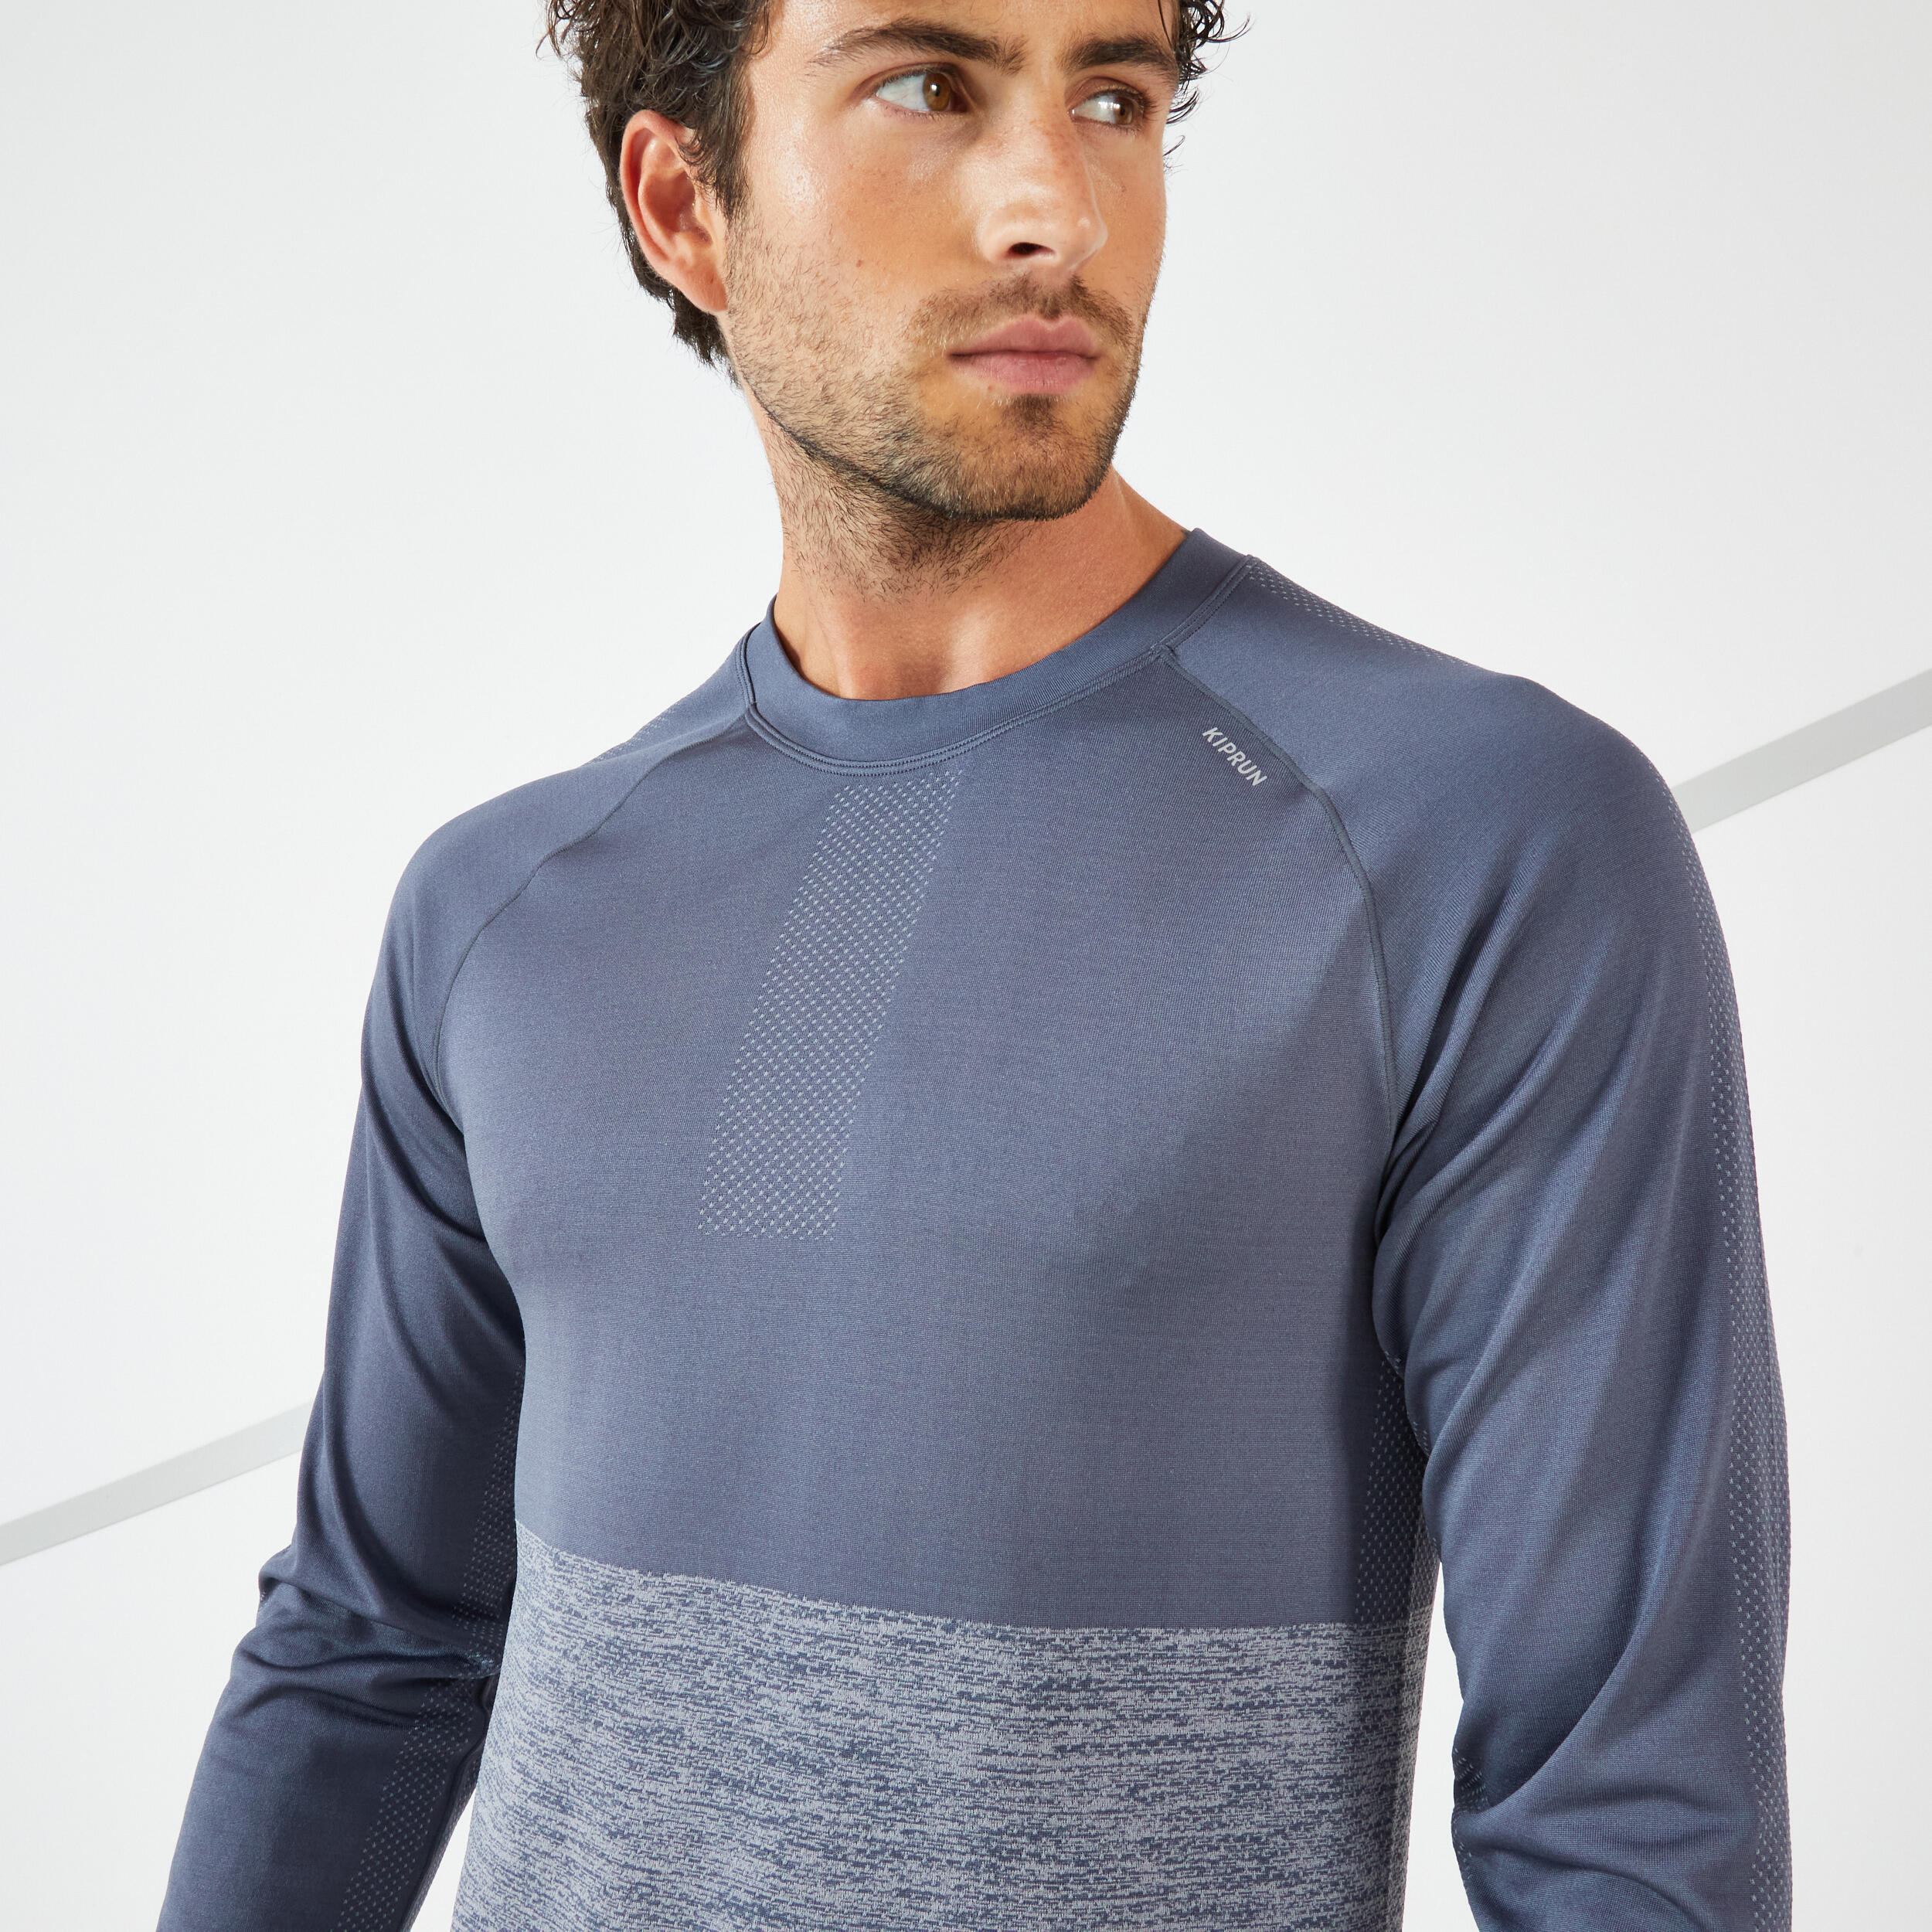 CARE MEN'S BREATHABLE LONG-SLEEVED RUNNING T-SHIRT - GREY LIMITED EDITION 4/9